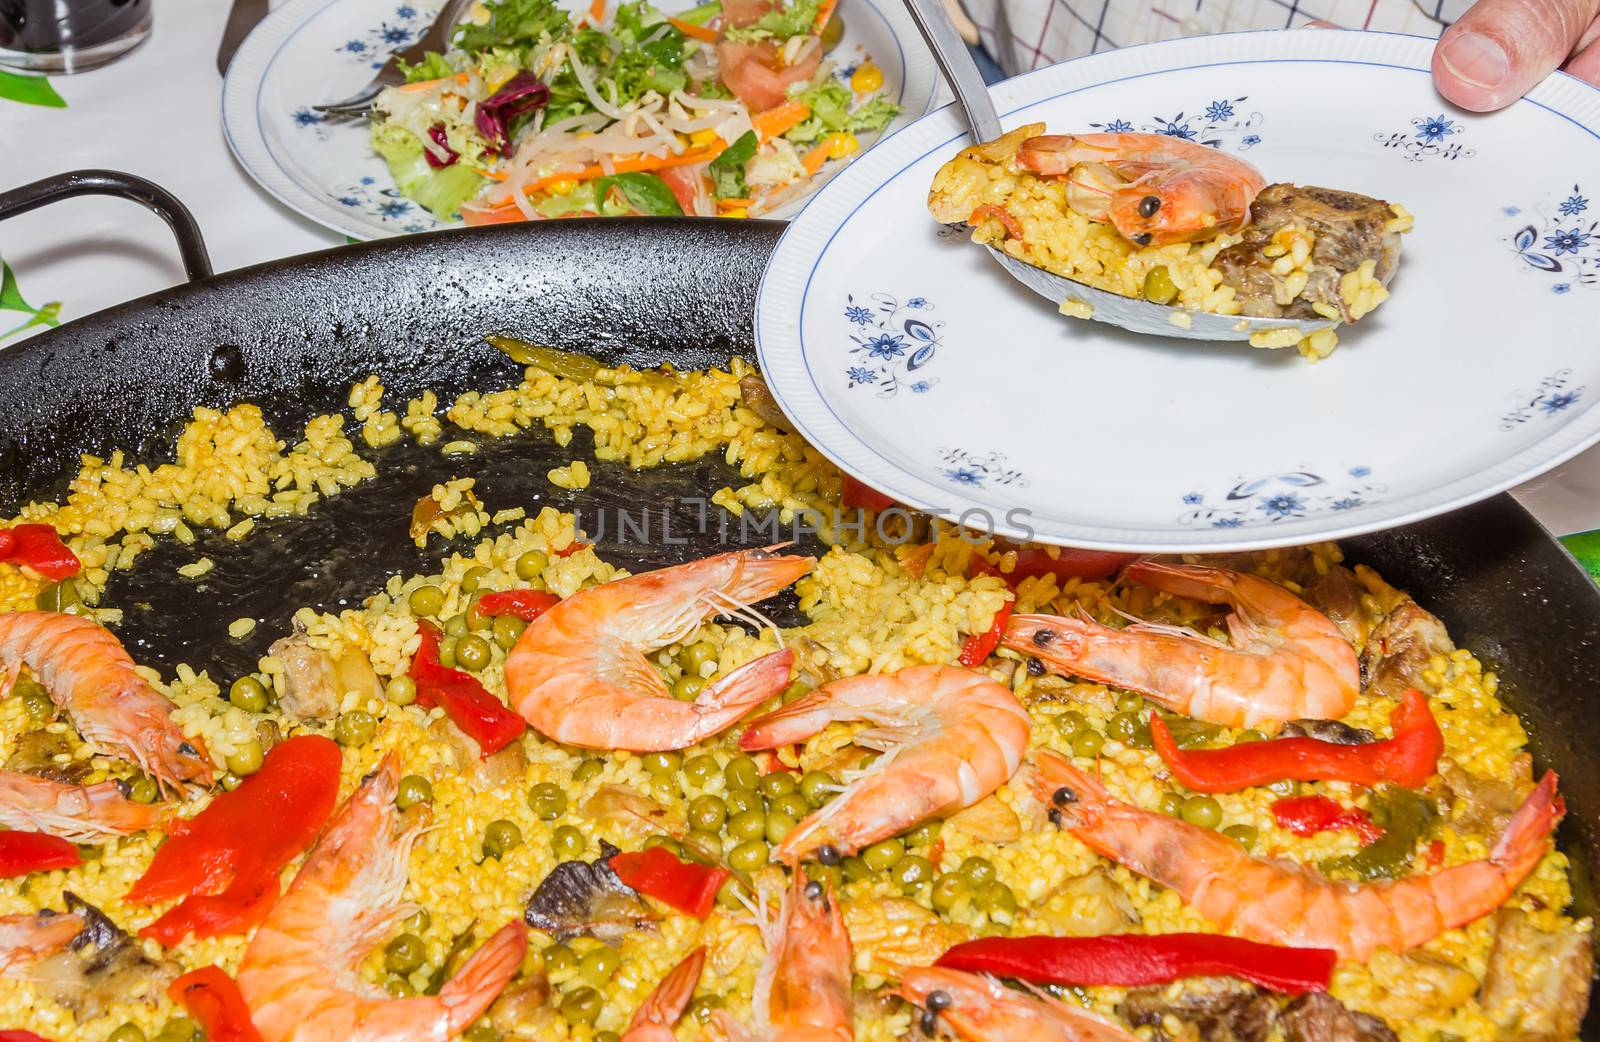 Serving traditional spanish paella cooked in a pan, with yellow rice and seafood